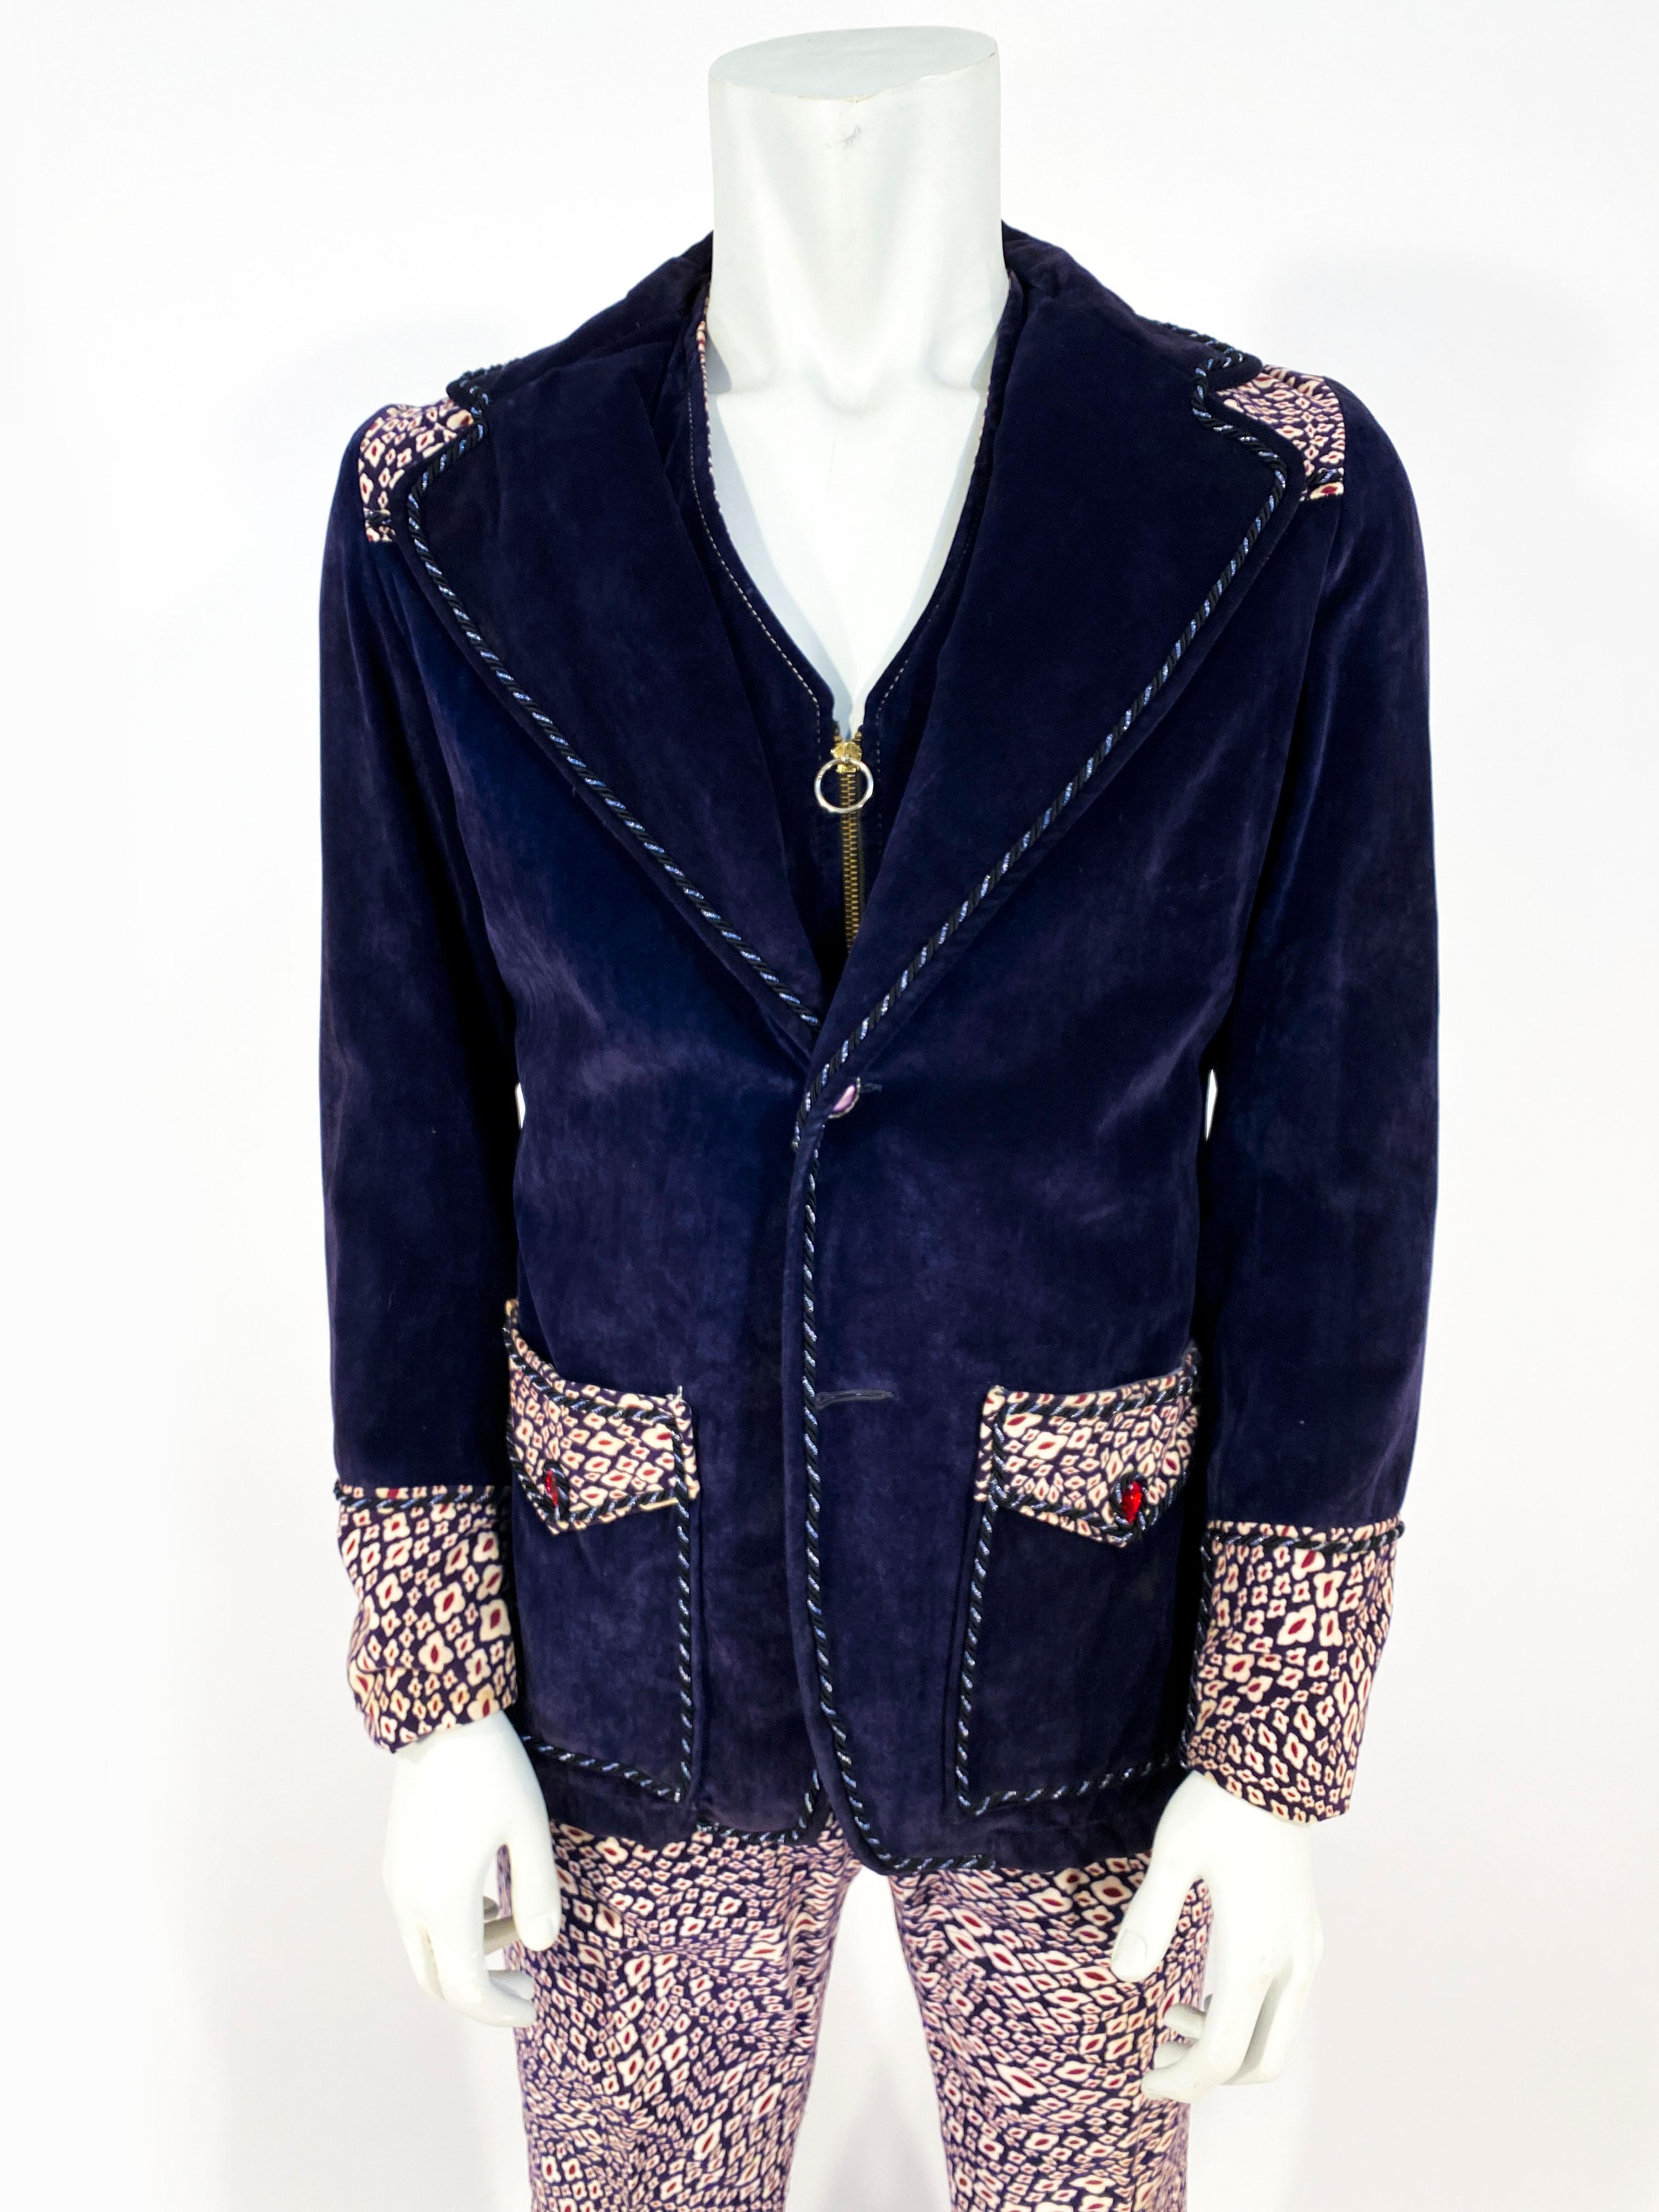 1960s custom-made men's mod cotton velvet three-piece (jacket, vest, and pants) suit. The cotton velvet is an eggplant purple in color with cream and red contrast fabric in the jacket accents, vest, and pants. The vest is reversible with a plain